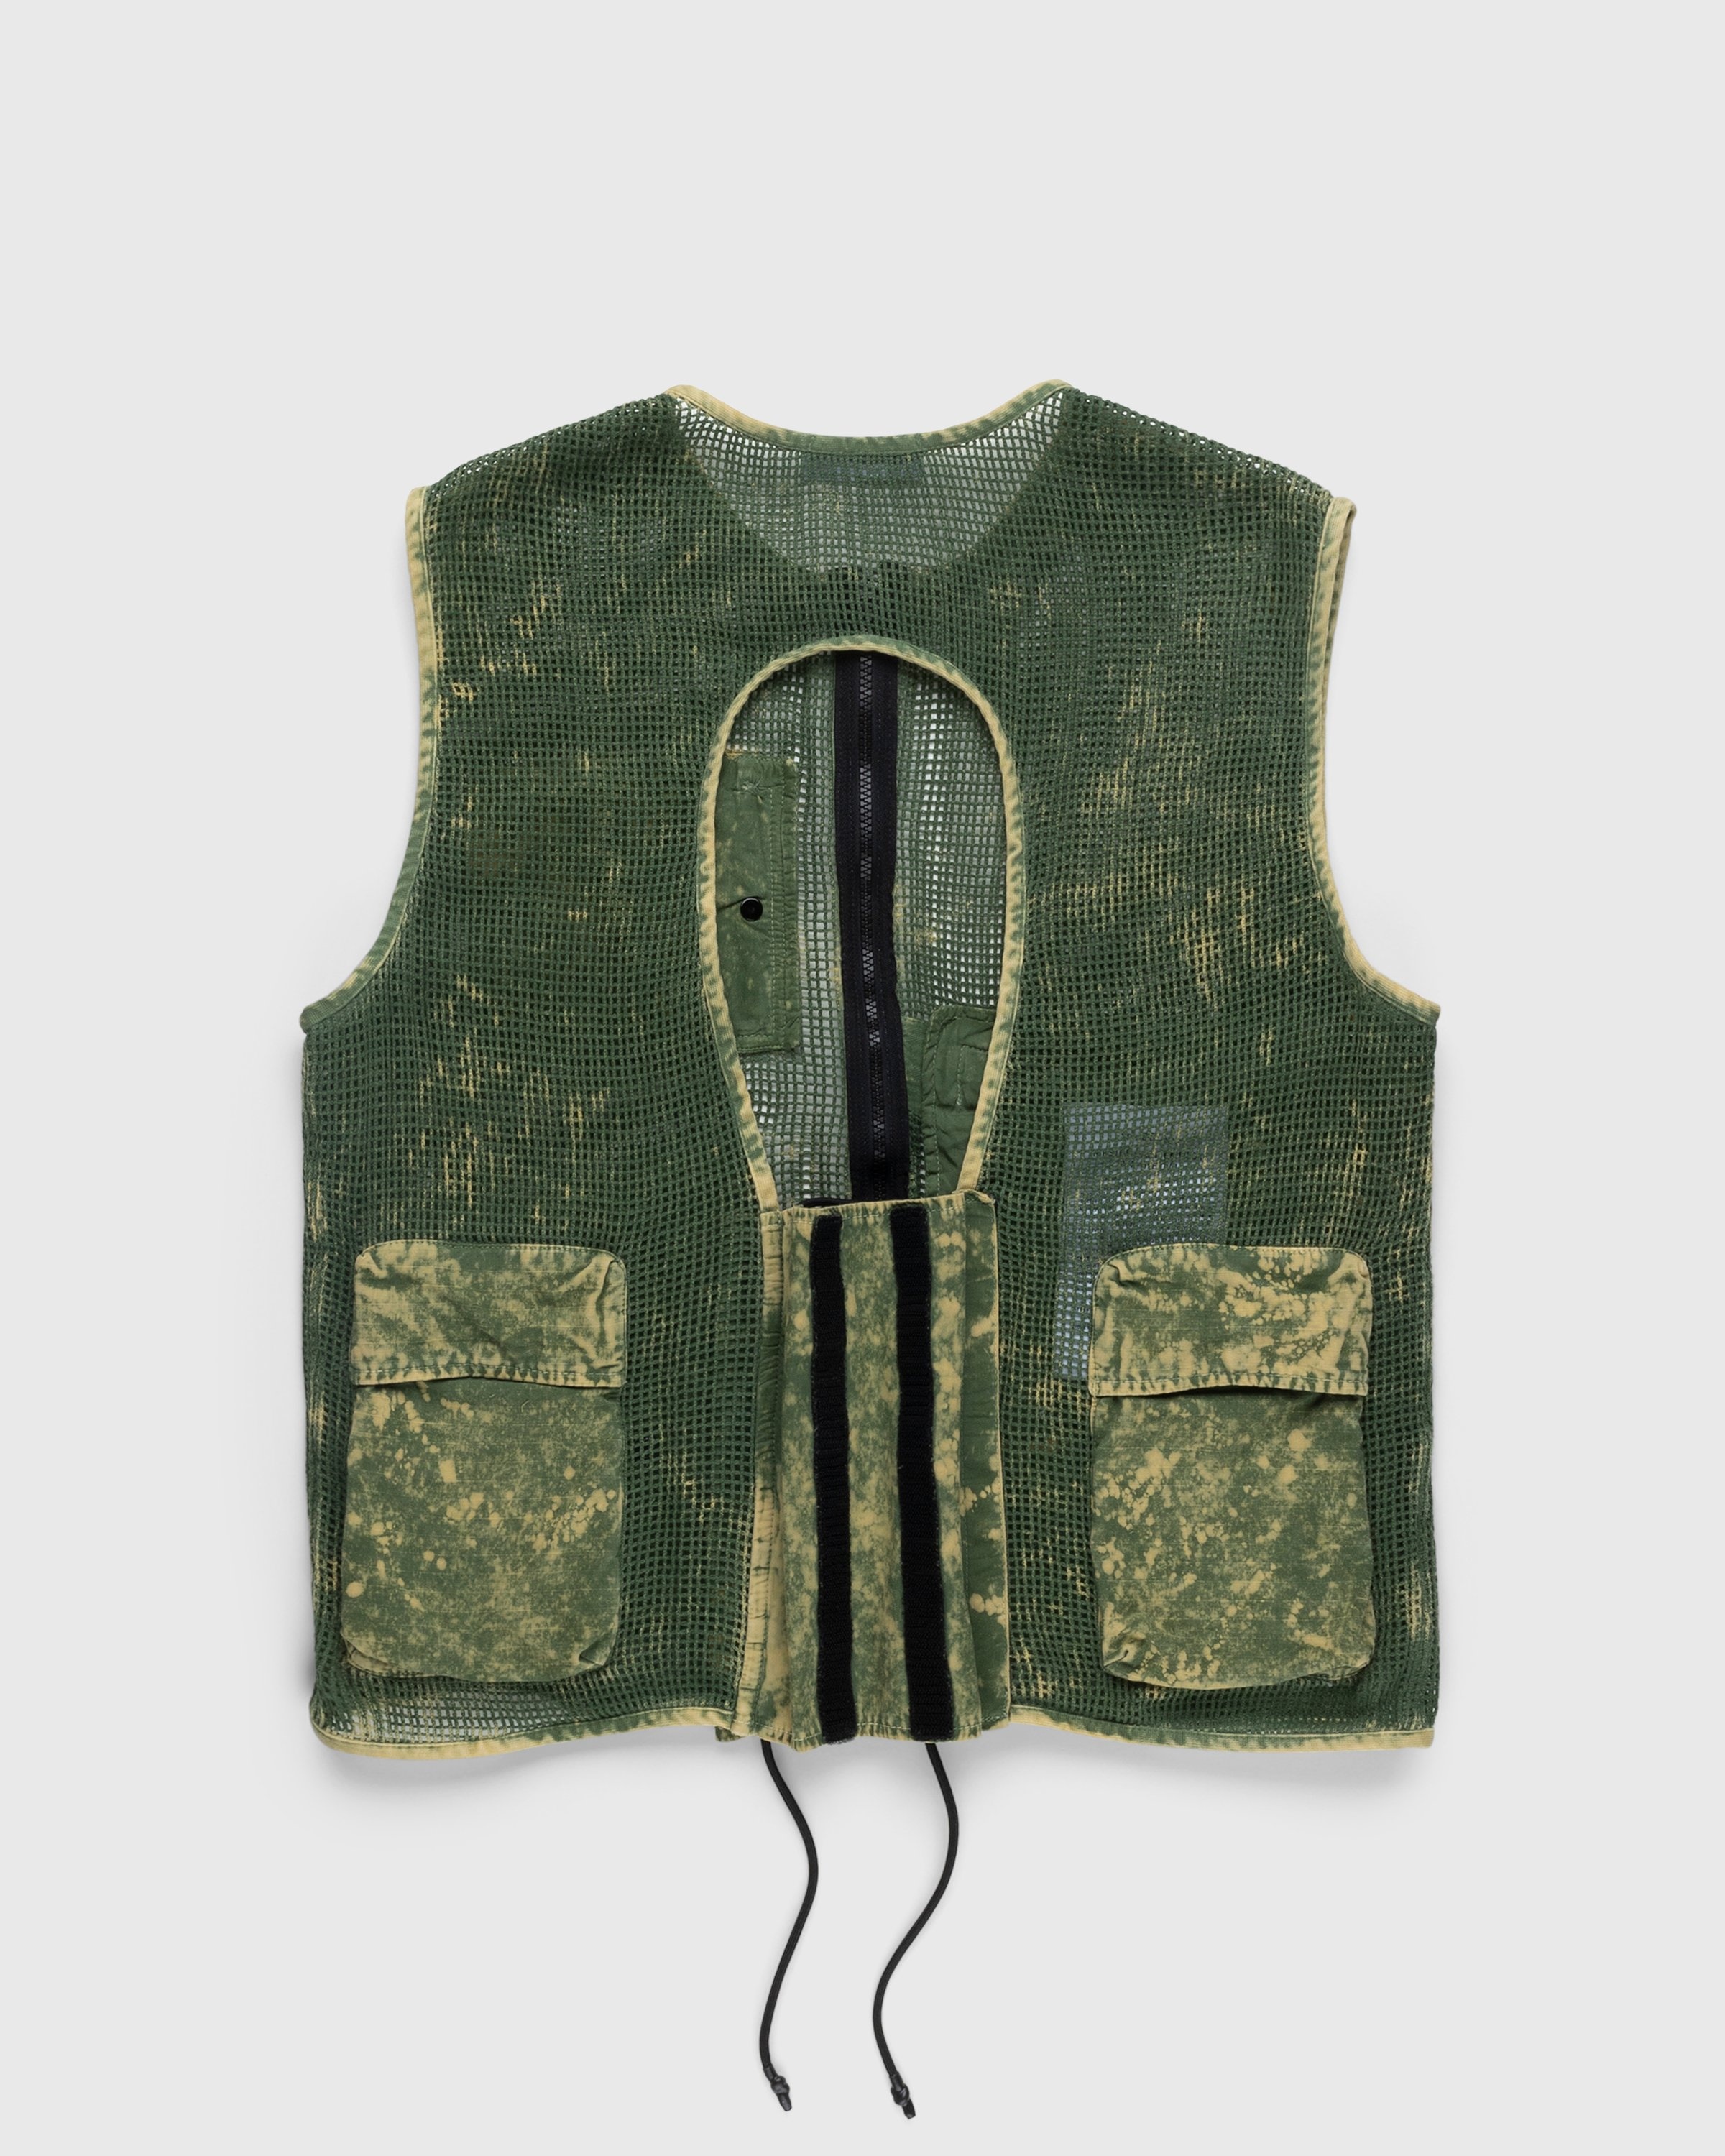 Stone Island – G0622 Garment-Dyed Cotton Mesh Vest Olive - Outerwear - Green - Image 2